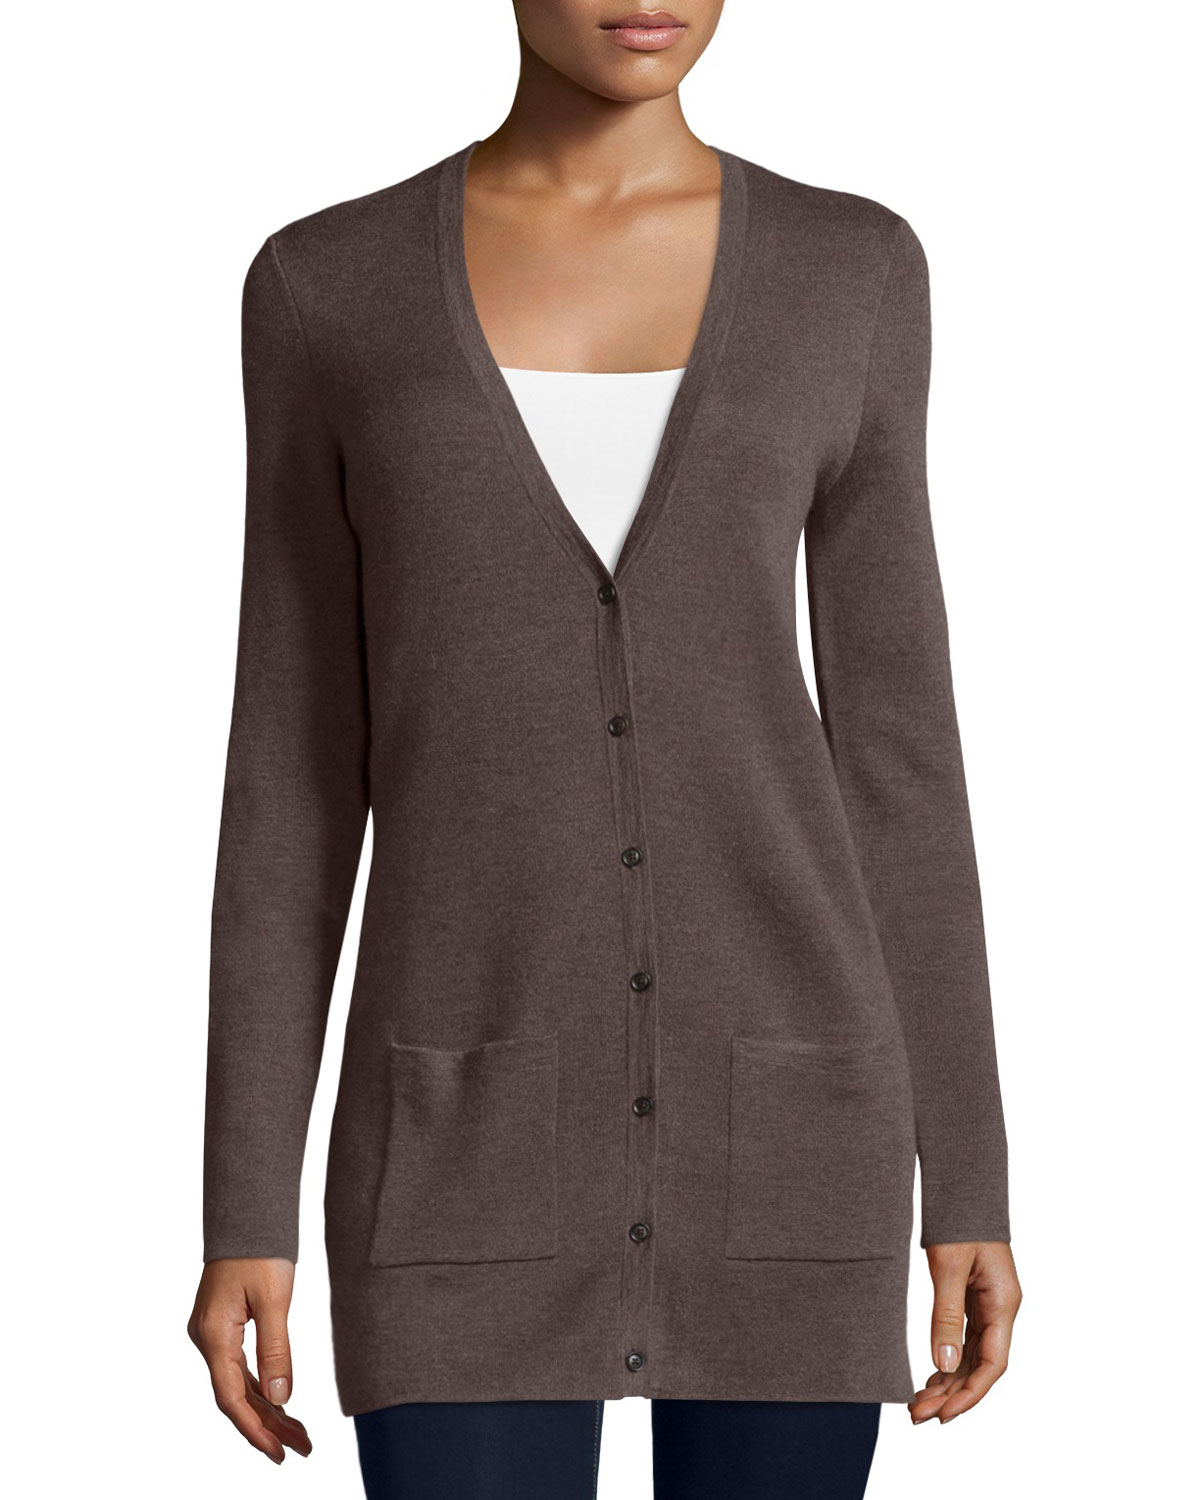 Lyst - Michael Kors Cashmere Button-front Cardigan in Brown